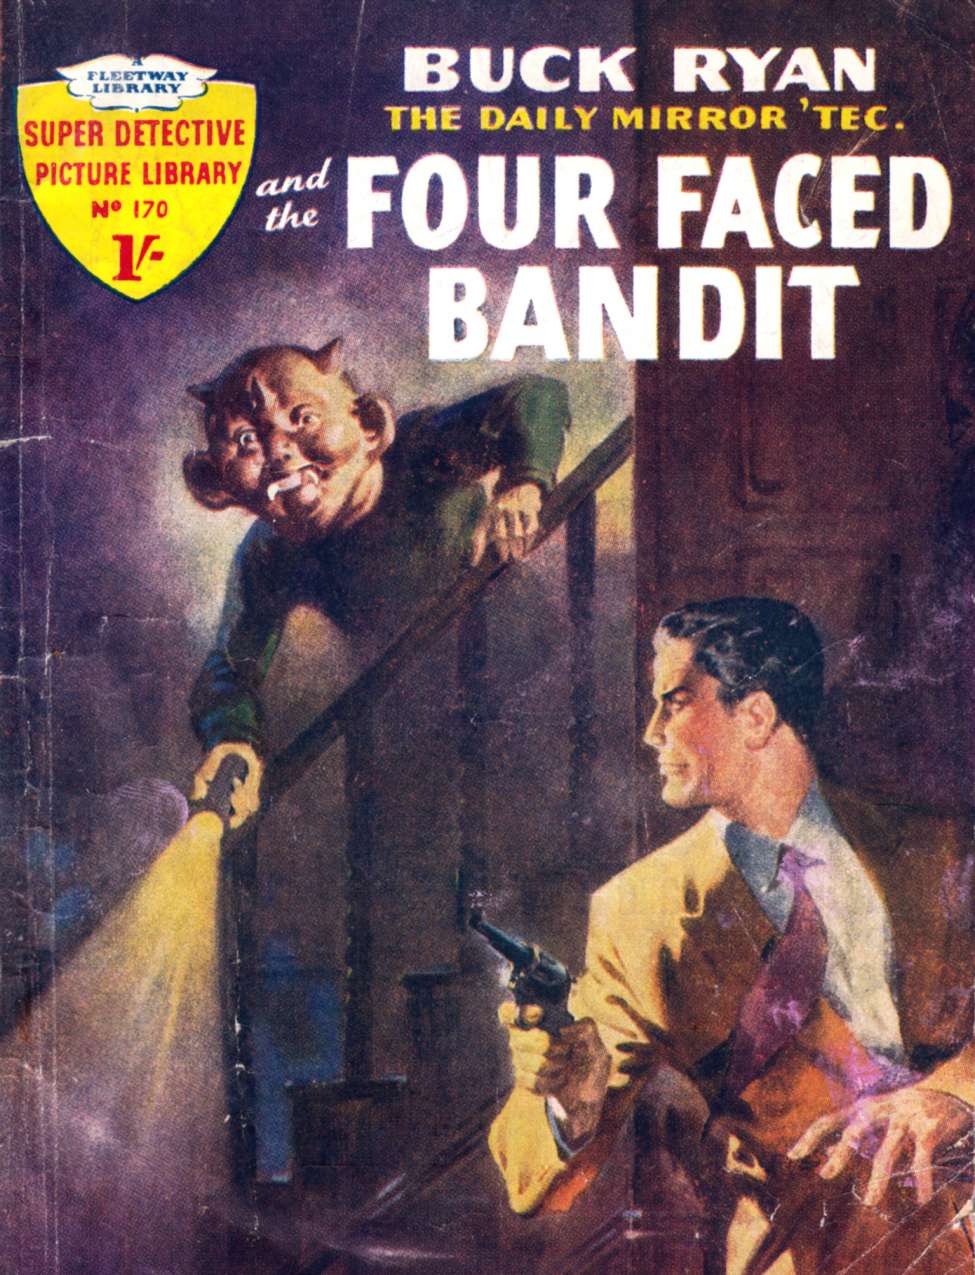 Comic Book Cover For Super Detective Library 170 - Buck Ryan-Four Faced Bandit